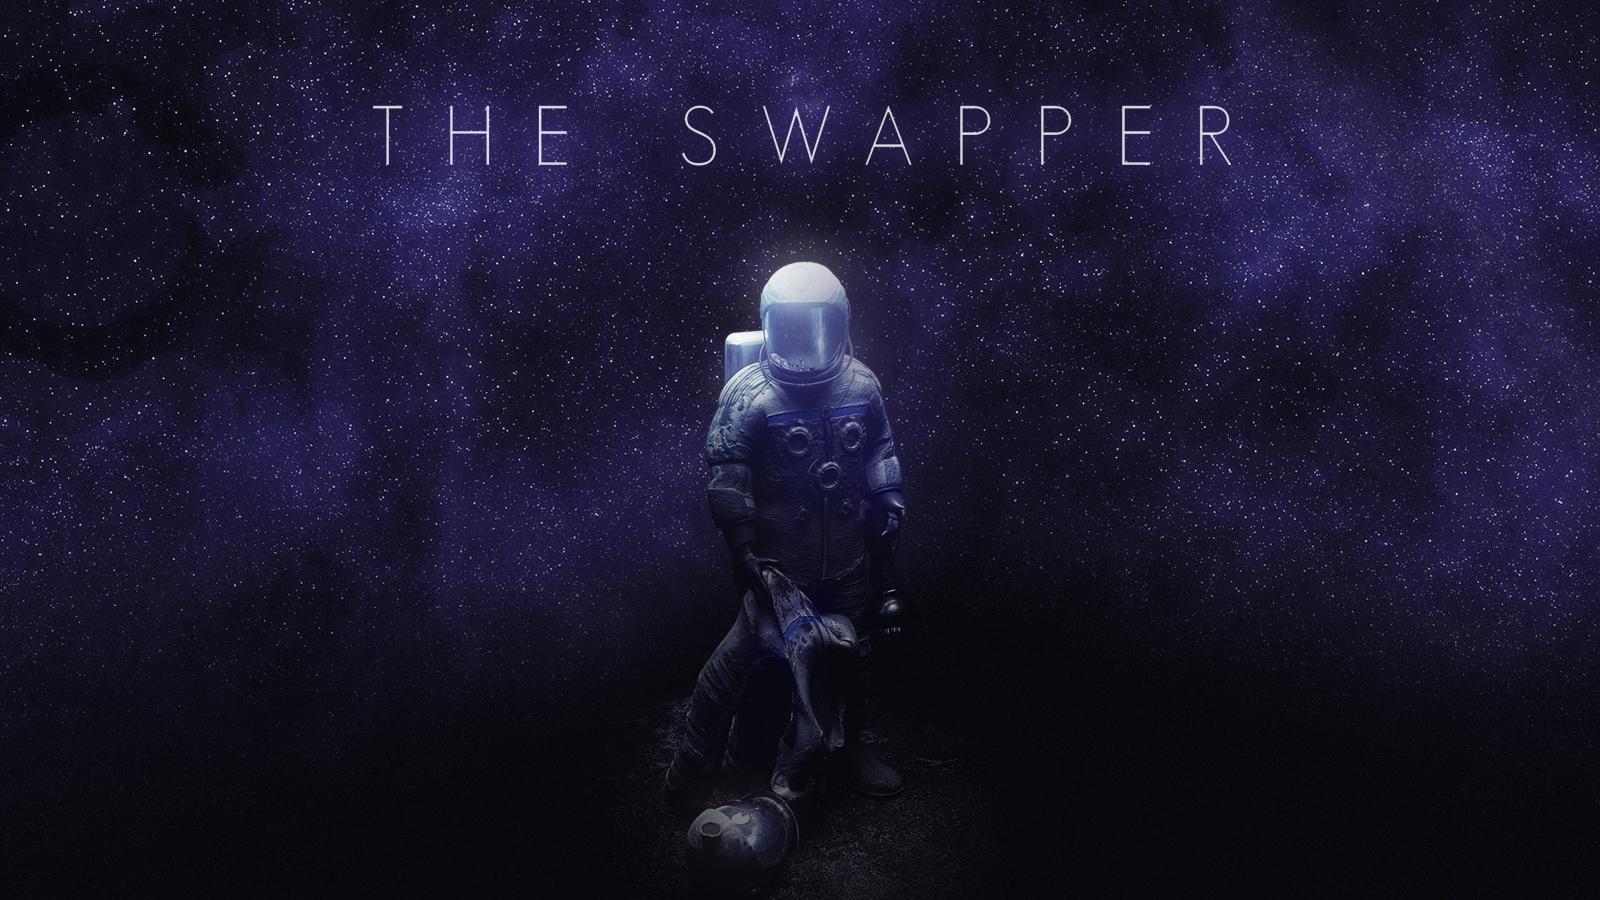 HQ The Swapper Wallpapers | File 2432.31Kb